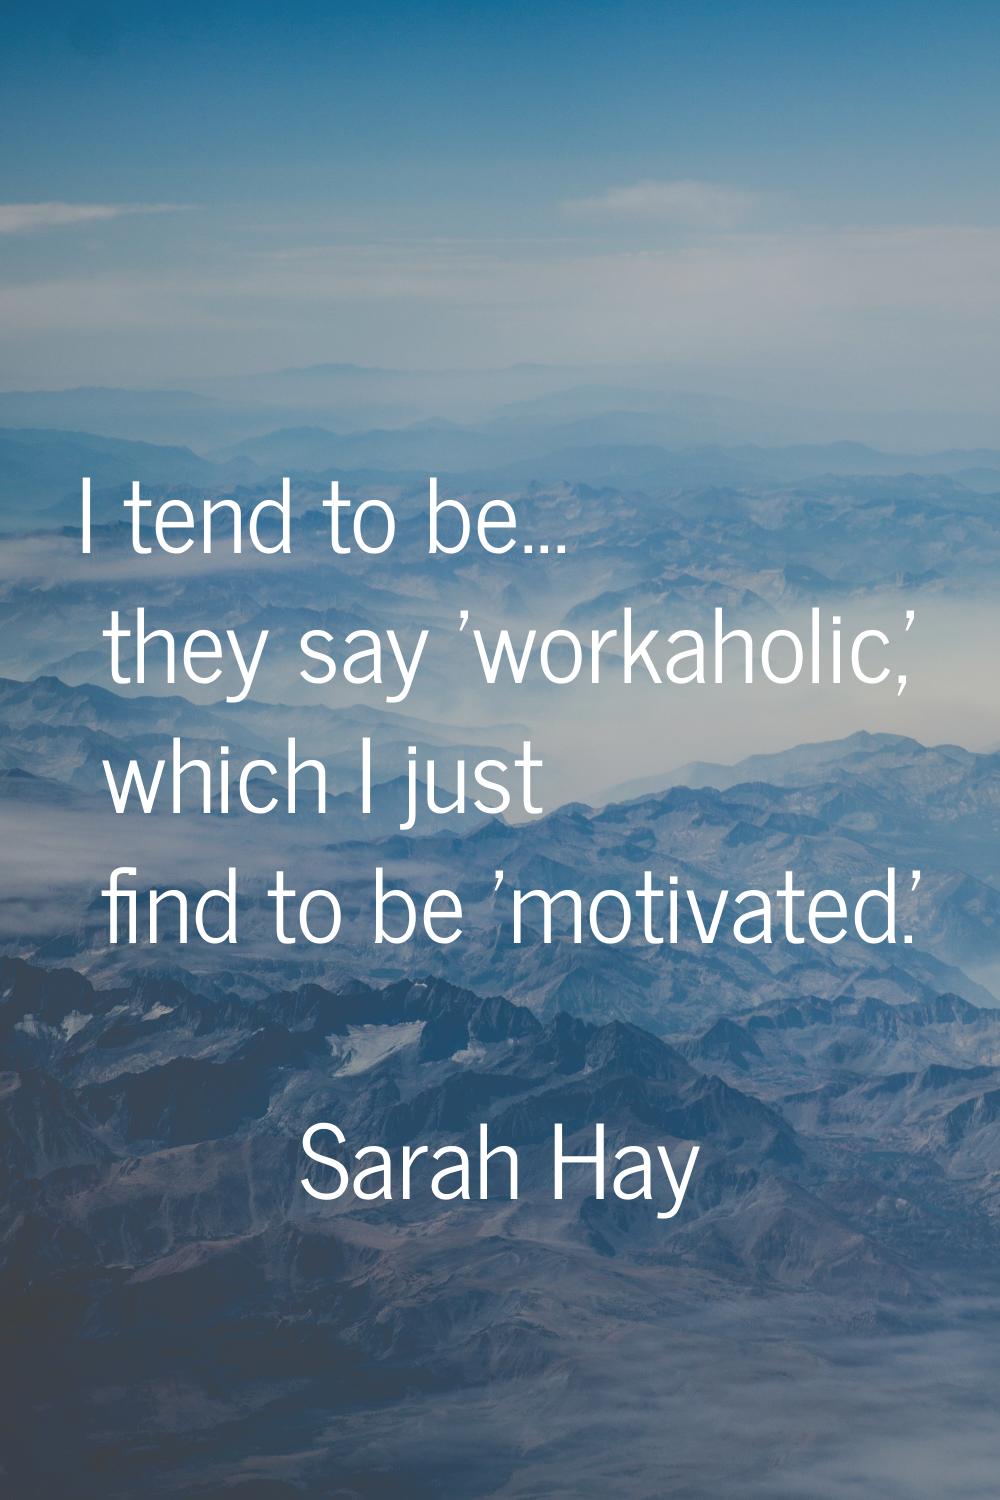 I tend to be... they say 'workaholic,' which I just find to be 'motivated.'